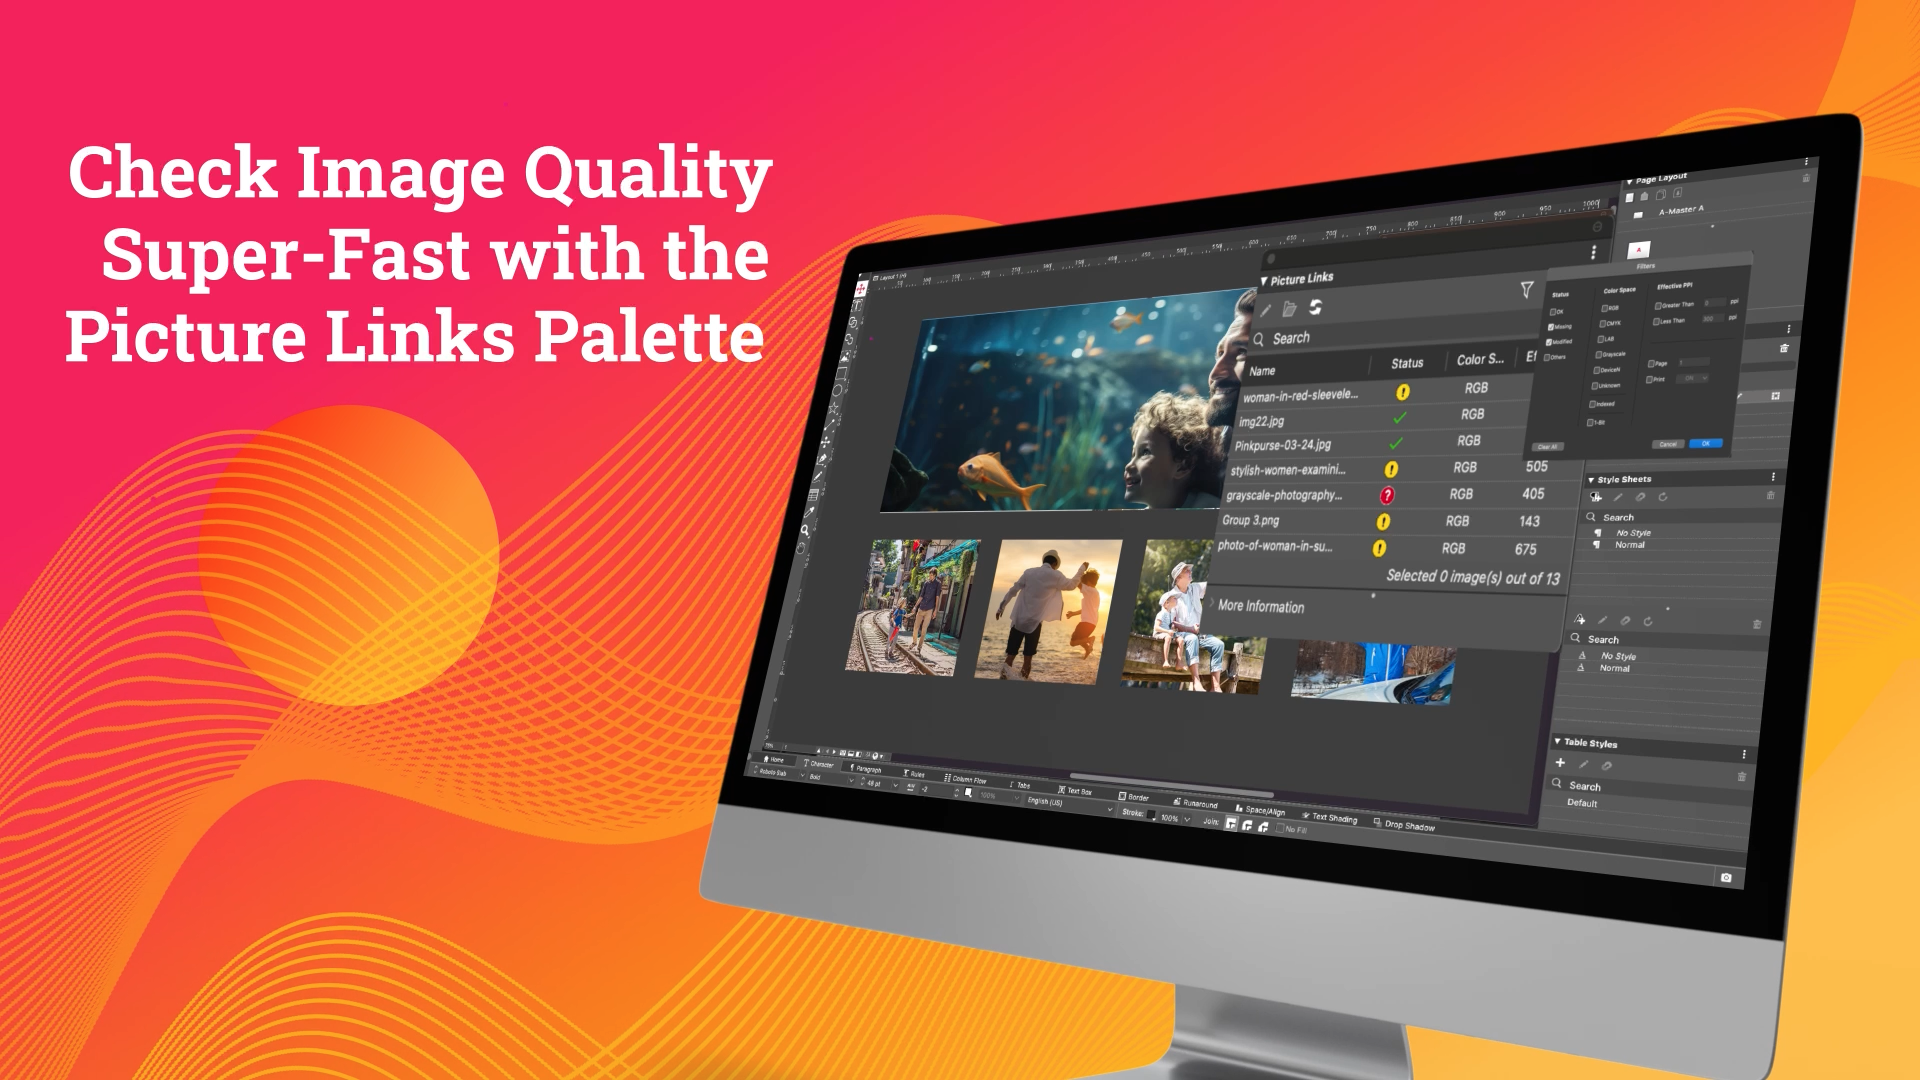 Check Image Quality Super-Fast with the Picture Links Palette